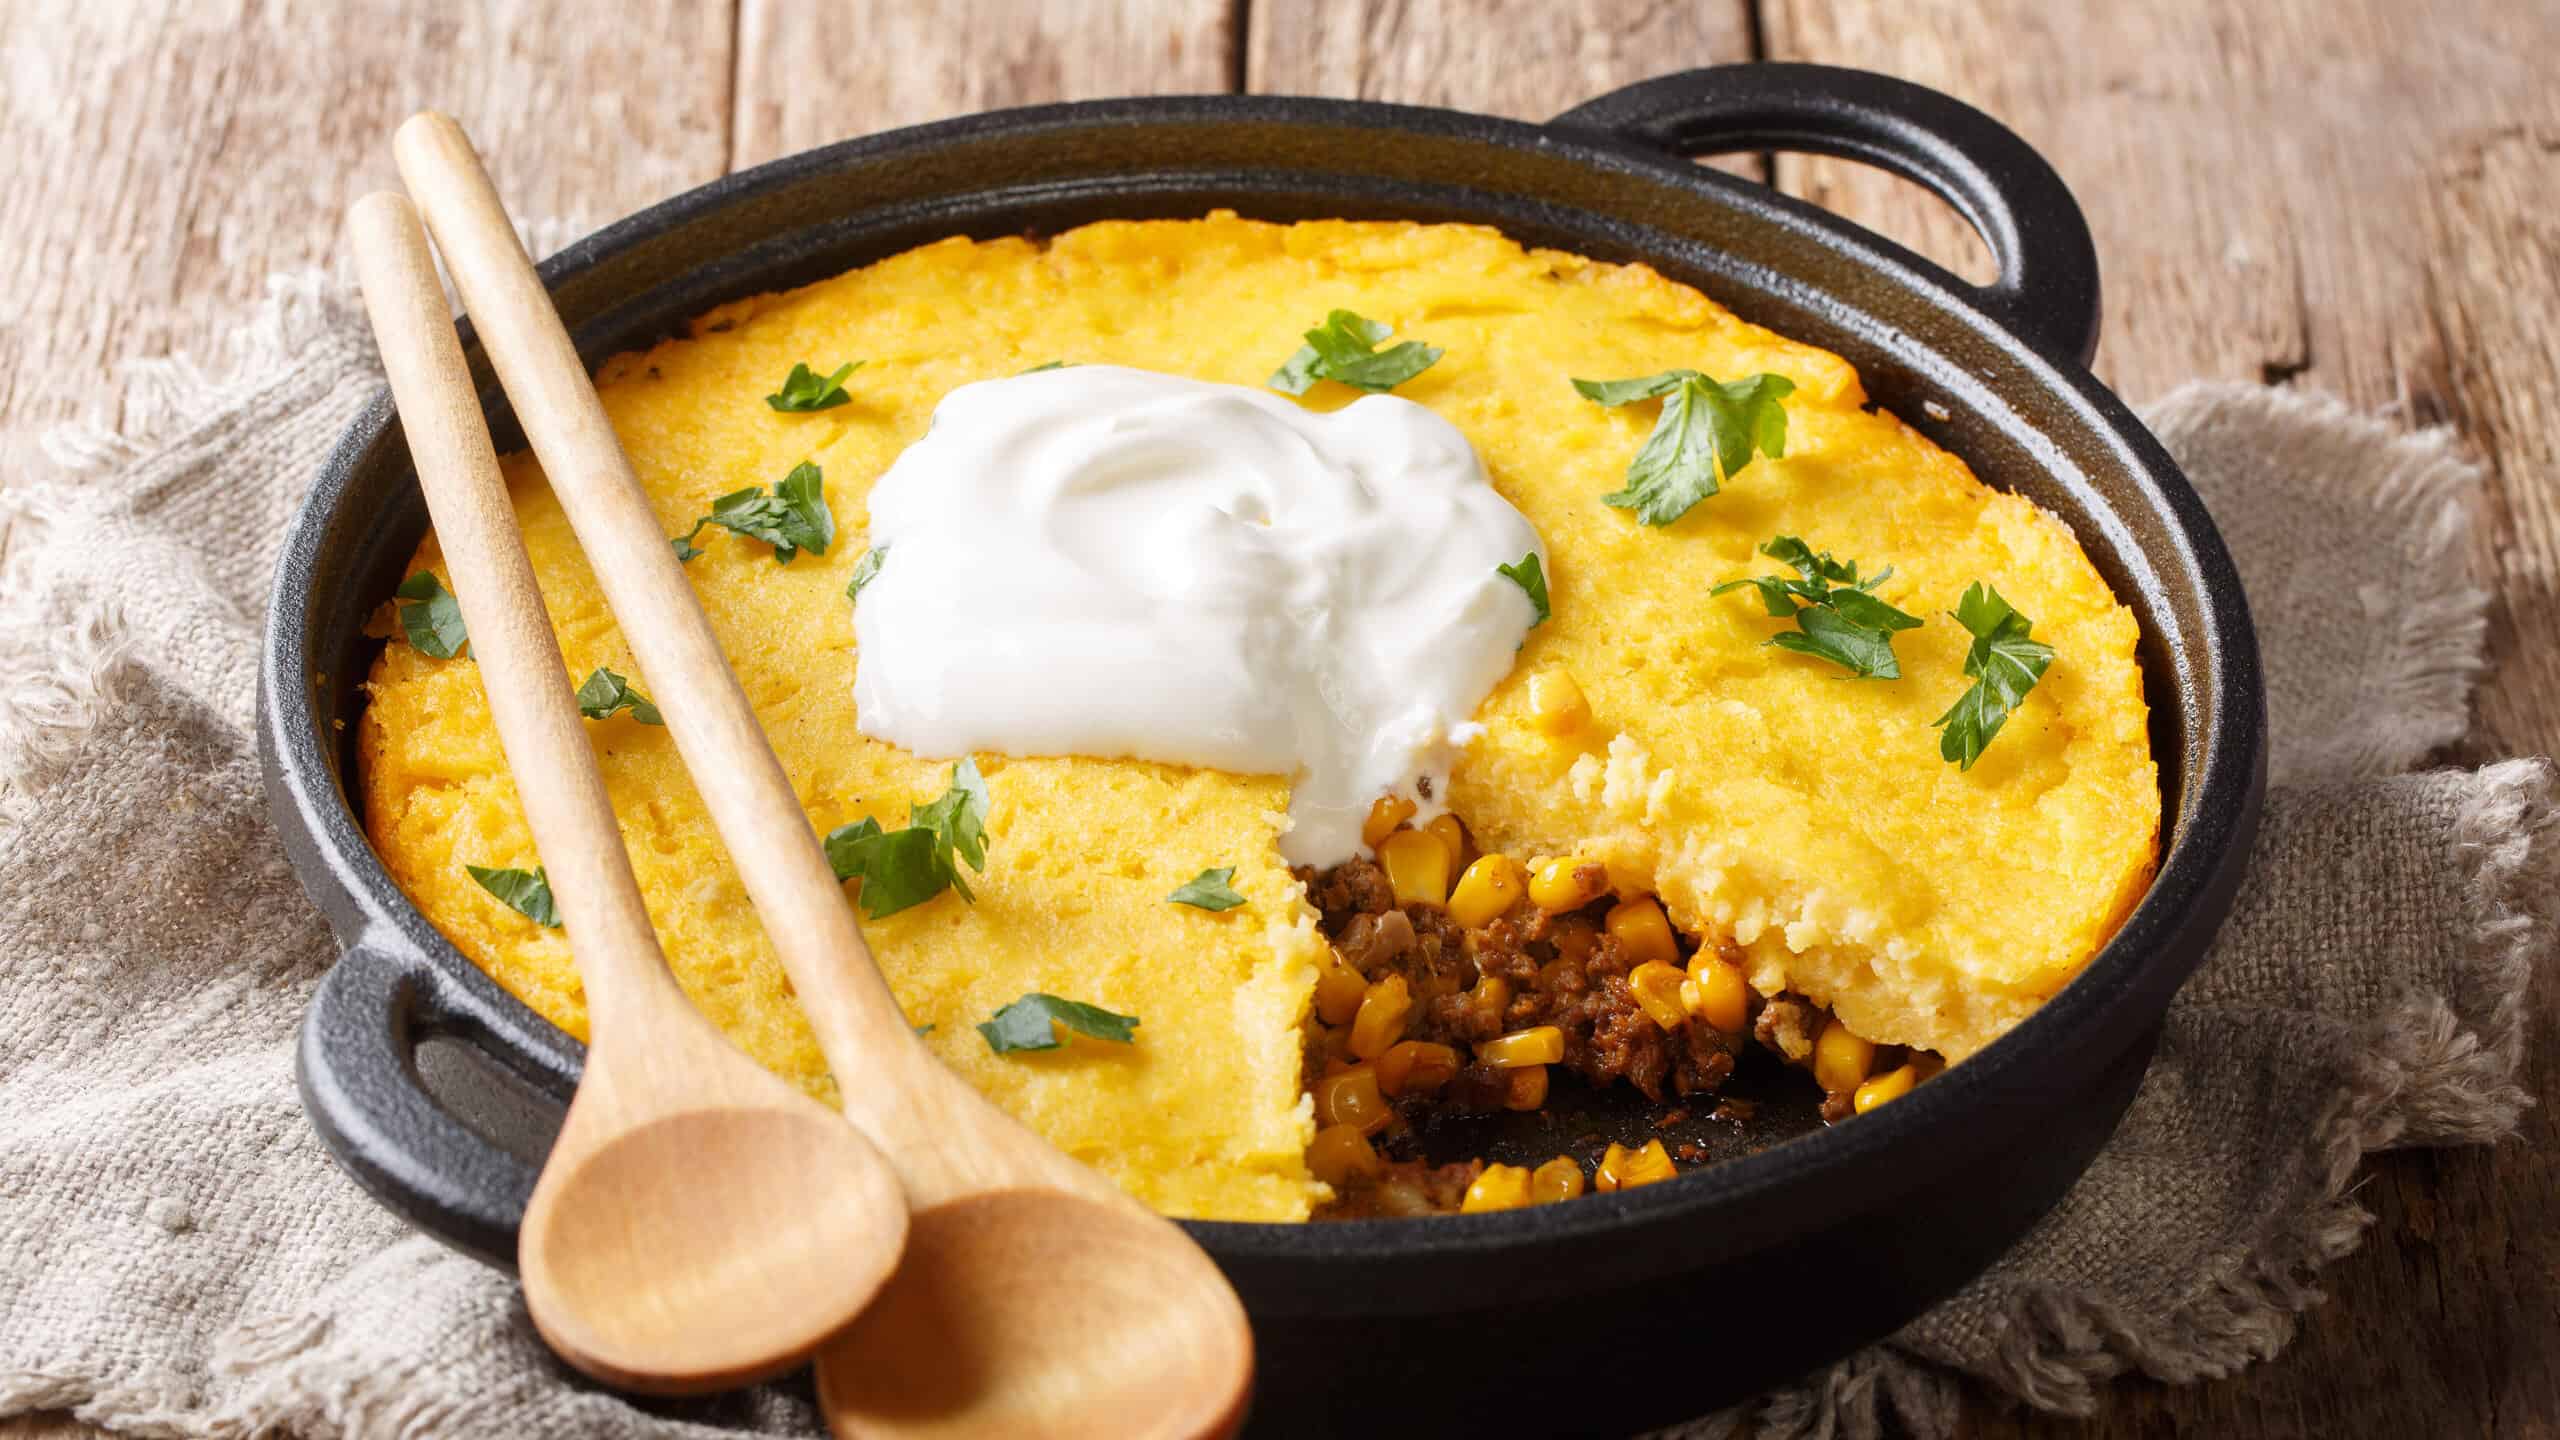 Tamale pie casserole served with sour cream close-up in a pan on the table.